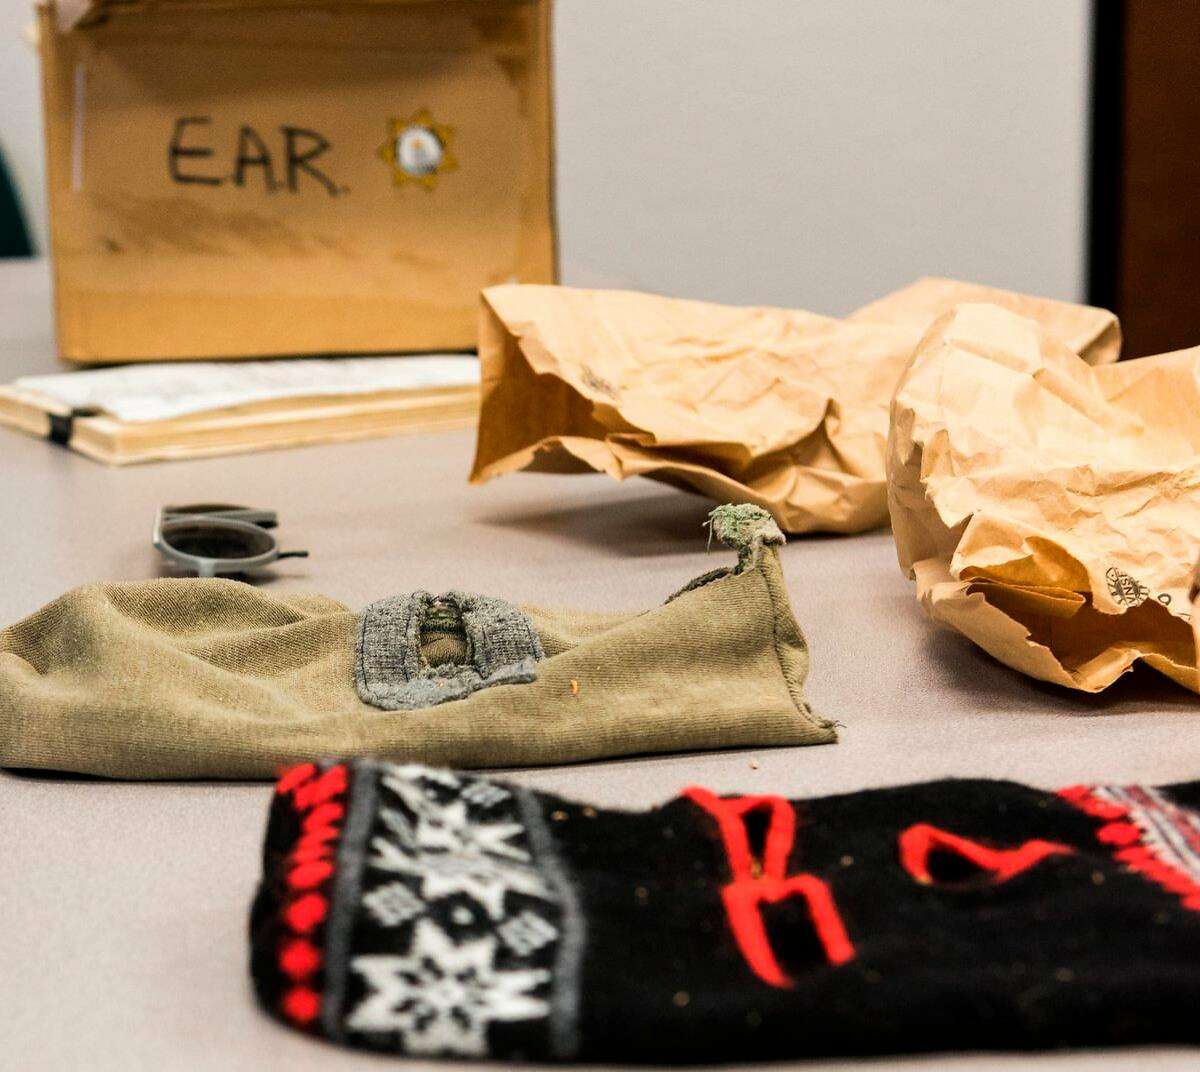 In this undated photo released by the FBI shows East Area Rapist Ski Masks in Sacramento, Calif. A California sheriff says a former police officer accused of being a serial killer and rapist was taken by surprise when deputies swooped in and arrested him as he stepped out of his home. Sacramento County Sheriff Matt Jones said deputies planned to arrest Joseph DeAngelo when he left his home on Tuesday, April 24, 2018. (FBI via AP)